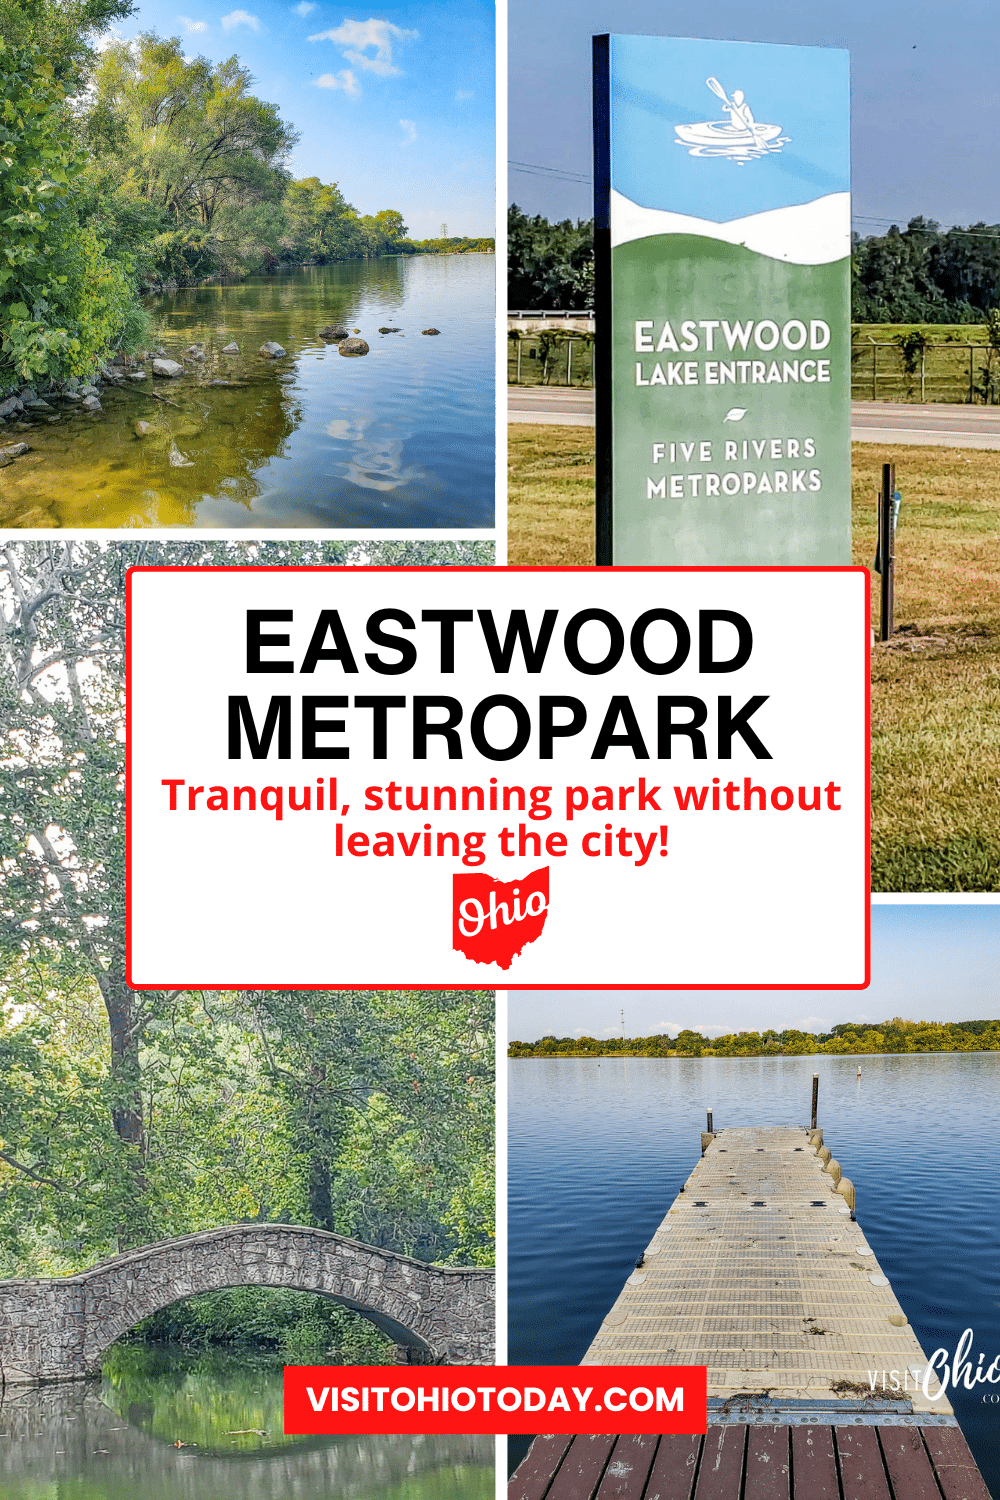 Discover Eastwood MetroPark in Dayton Ohio, where urban charm meets serene nature. 🏞️ Stroll along the river, fish in the lake, or simply relax amidst lush greenery. Ideal for family outings or solo nature escapes. Experience the beauty today! #EastwoodMetroPark #DaytonOhio #OutdoorFun